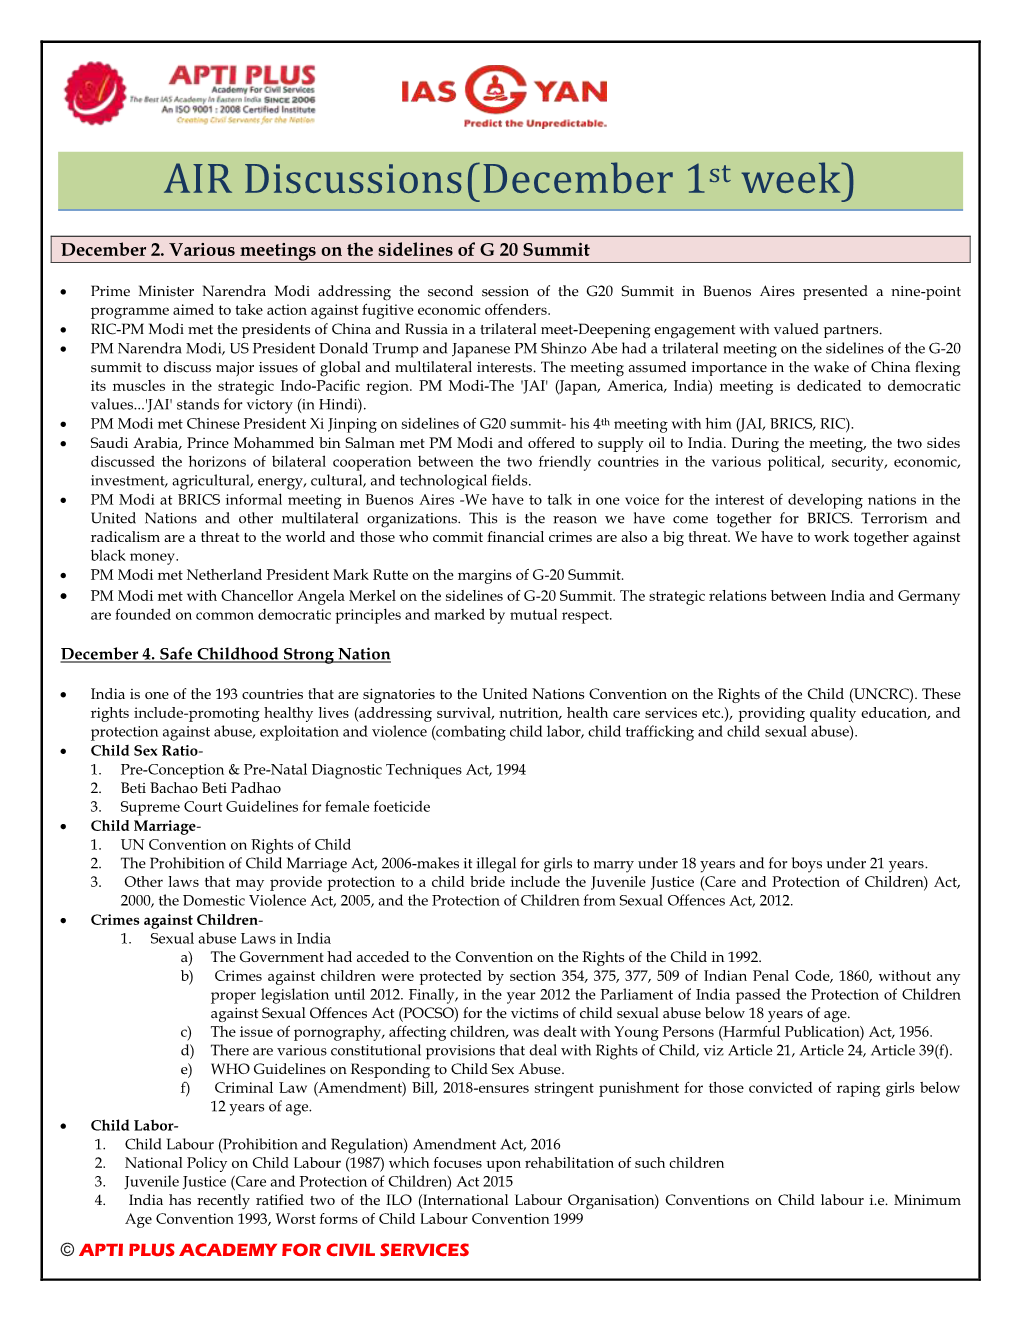 AIR Discussions(December 1St Week)